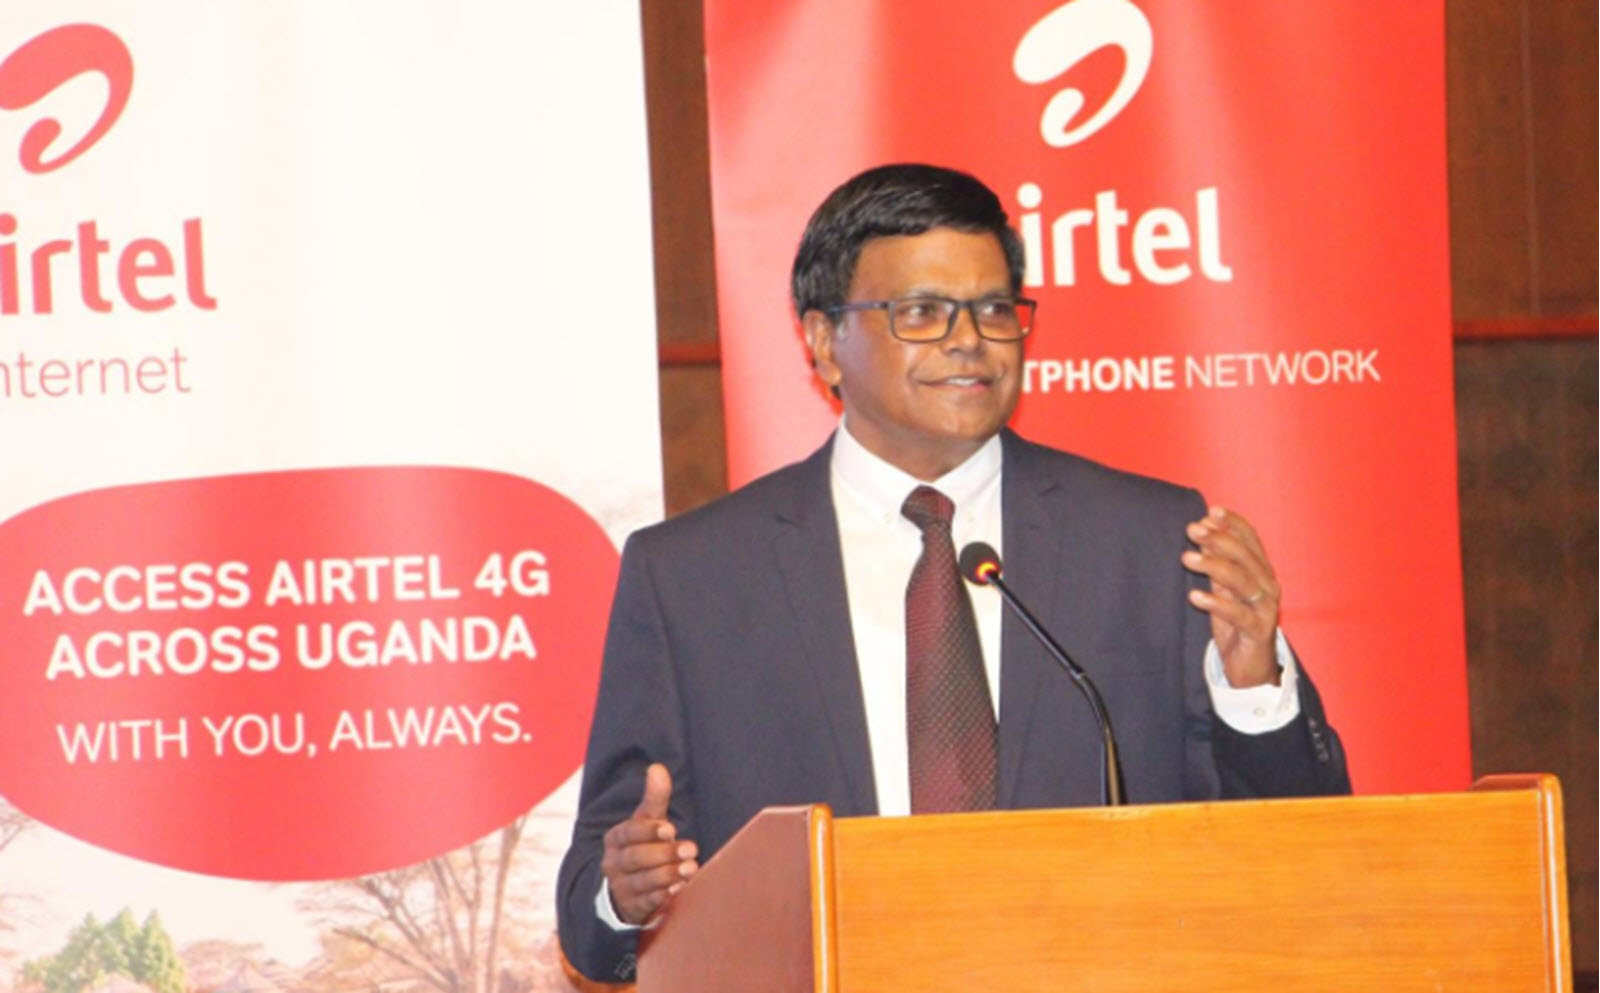 airtel 4g lte countrywide rollout in uganda